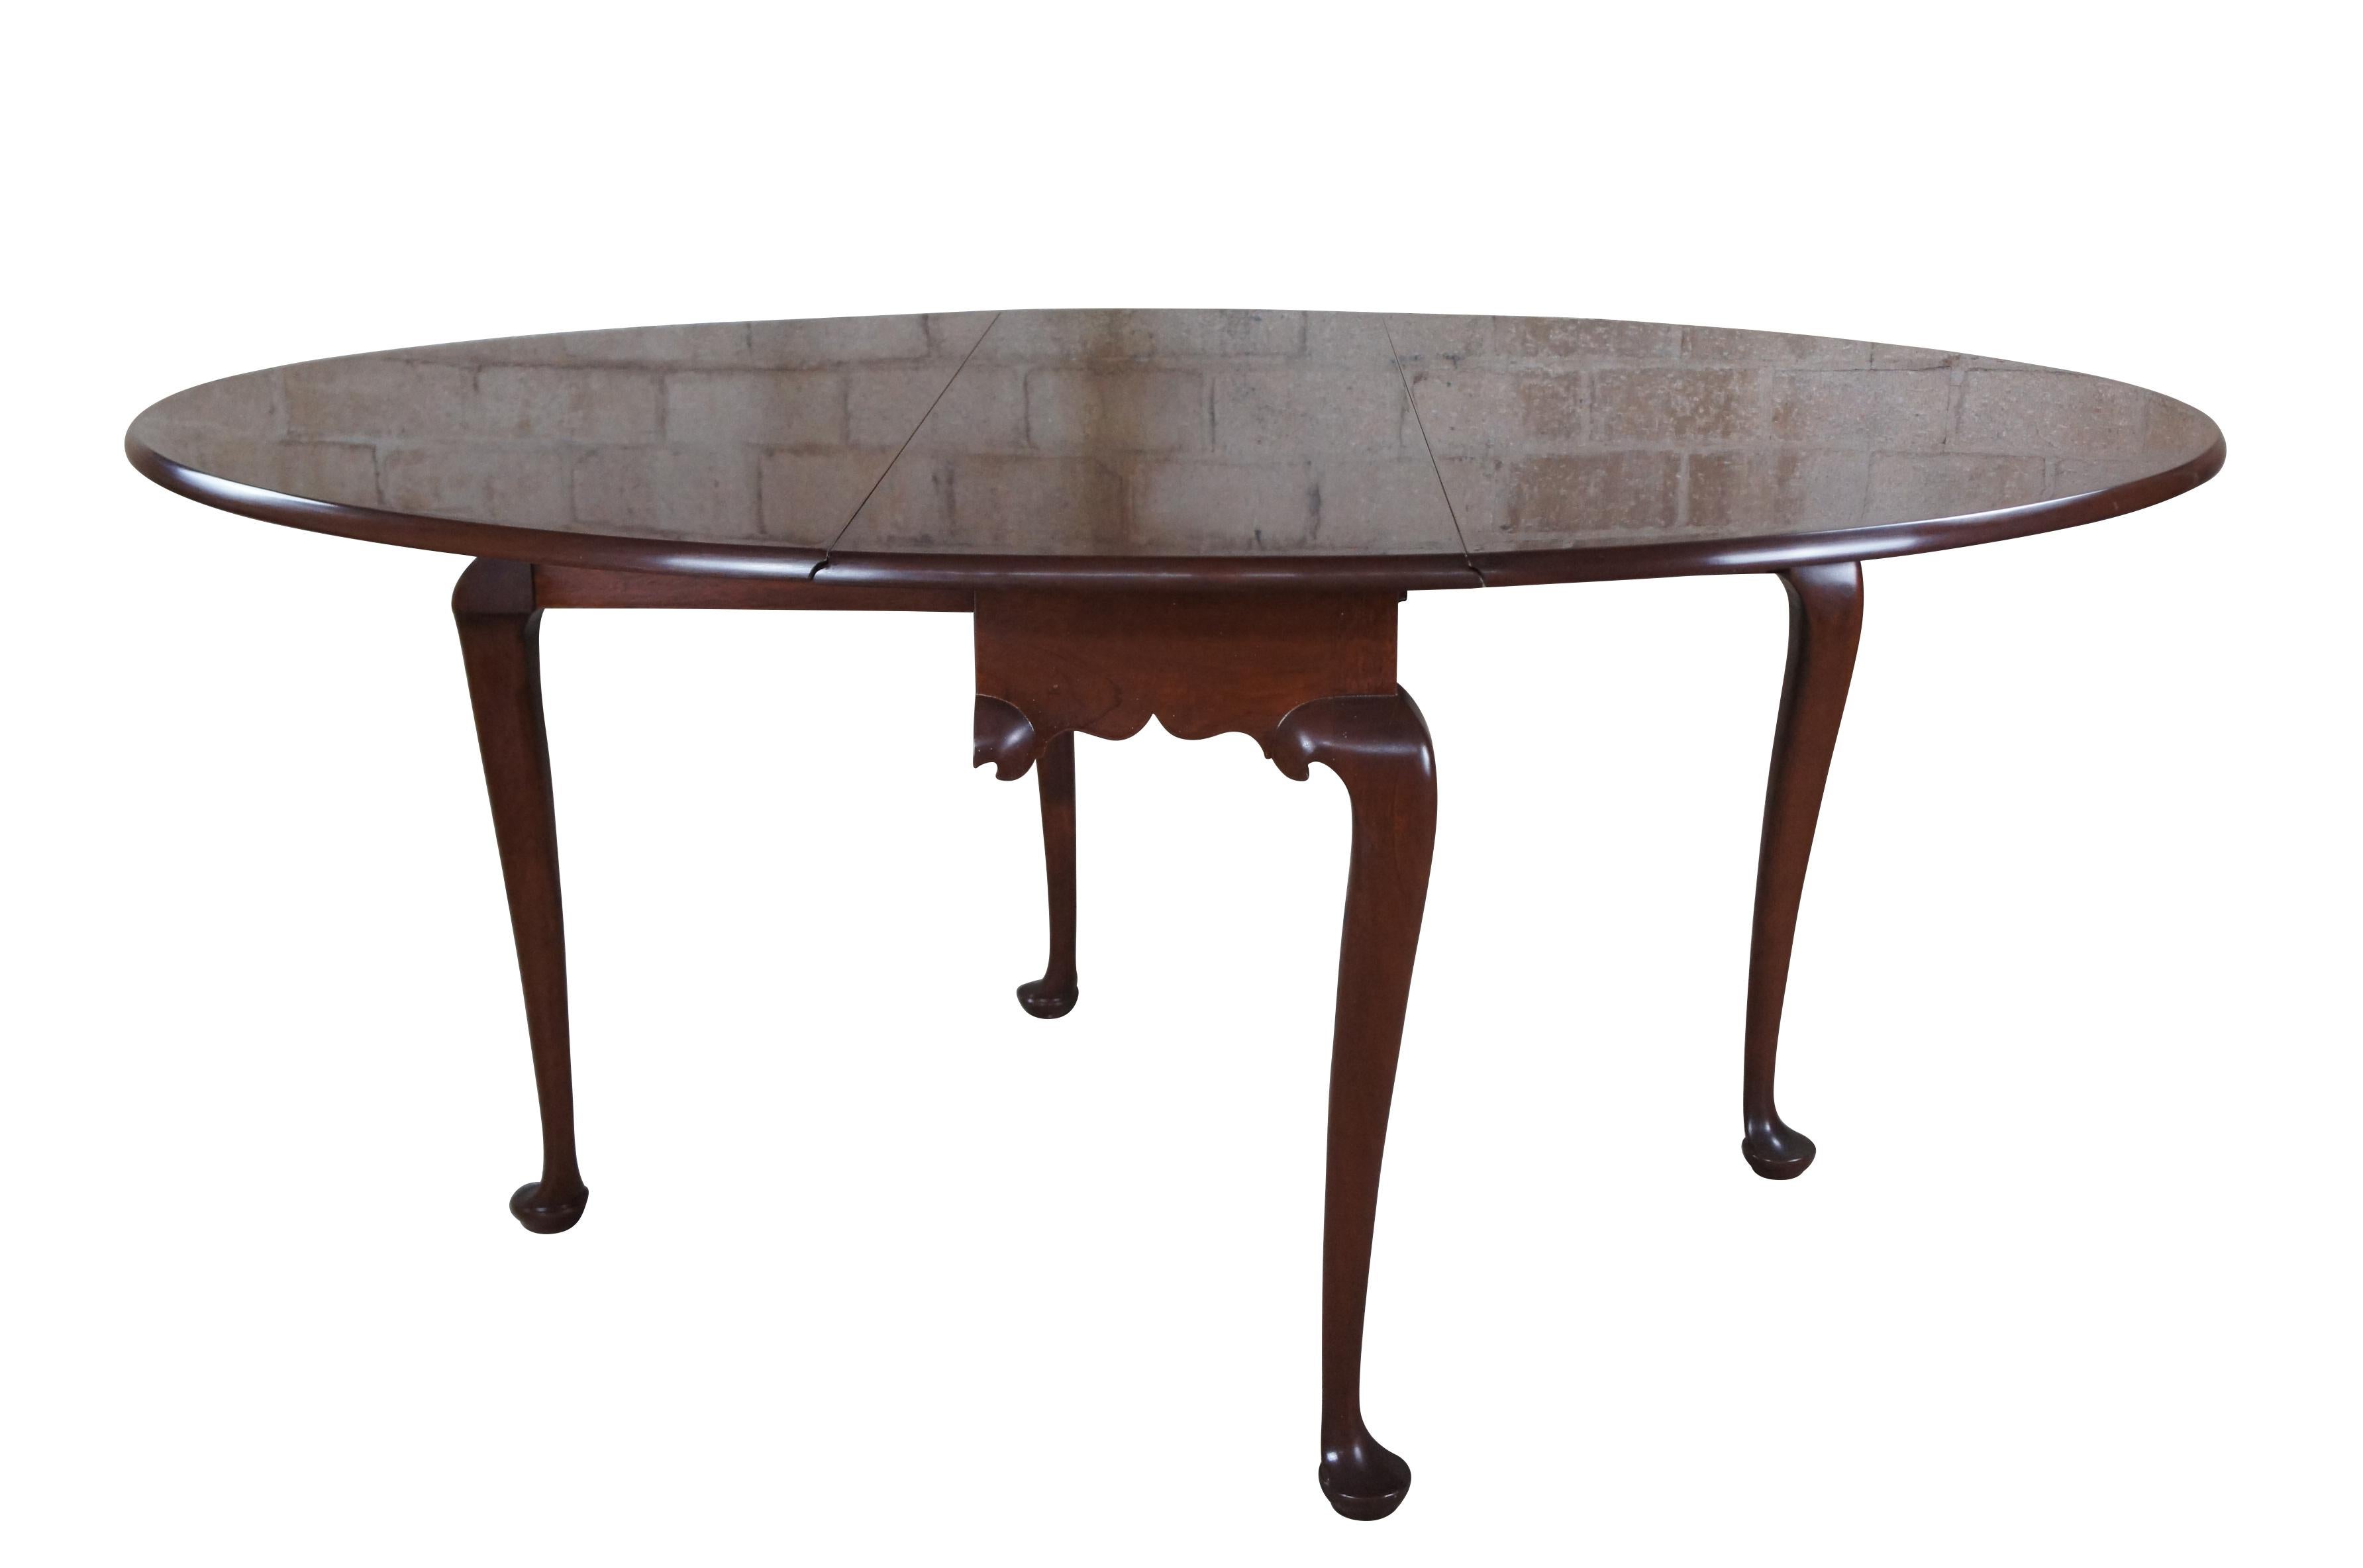 Vintage Biggs Furniture Chippendale / Queen Anne oval drop leaf dining table, circa last half 20th century. Made of mahogany featuring a high gloss georgian finish. The table has a rectangular or oval form with large drop leaves, gatelegs and